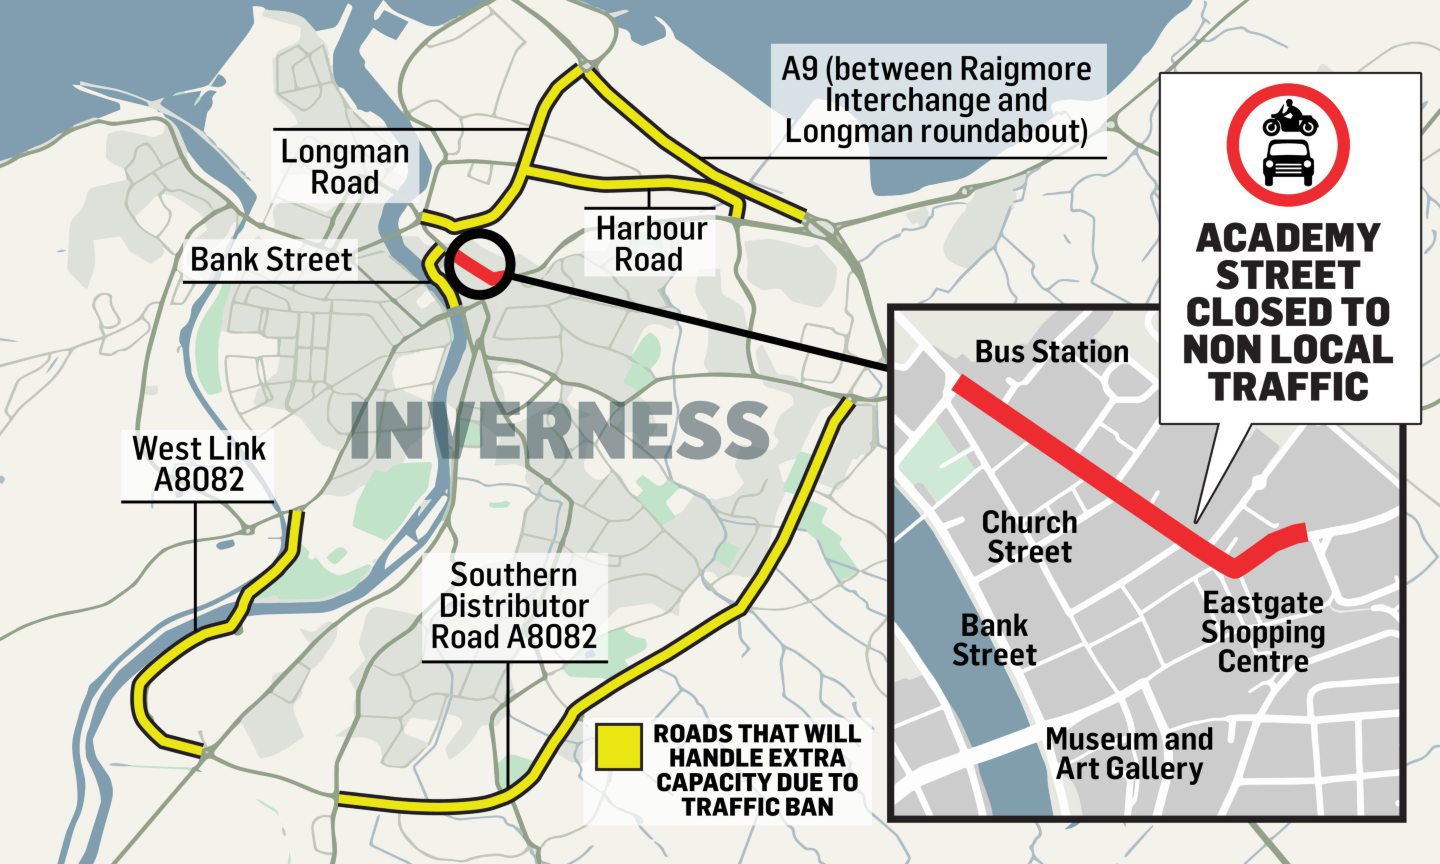 Map of Inverness, with the roads which will handle redirected traffic highlighted in yellow. This includes the A9 between Raigmore Interchange and Longman Roundabout, Longman Road, Bank Street, Harbour Road, West Link A8082 and Southern Distributor Road A8082.